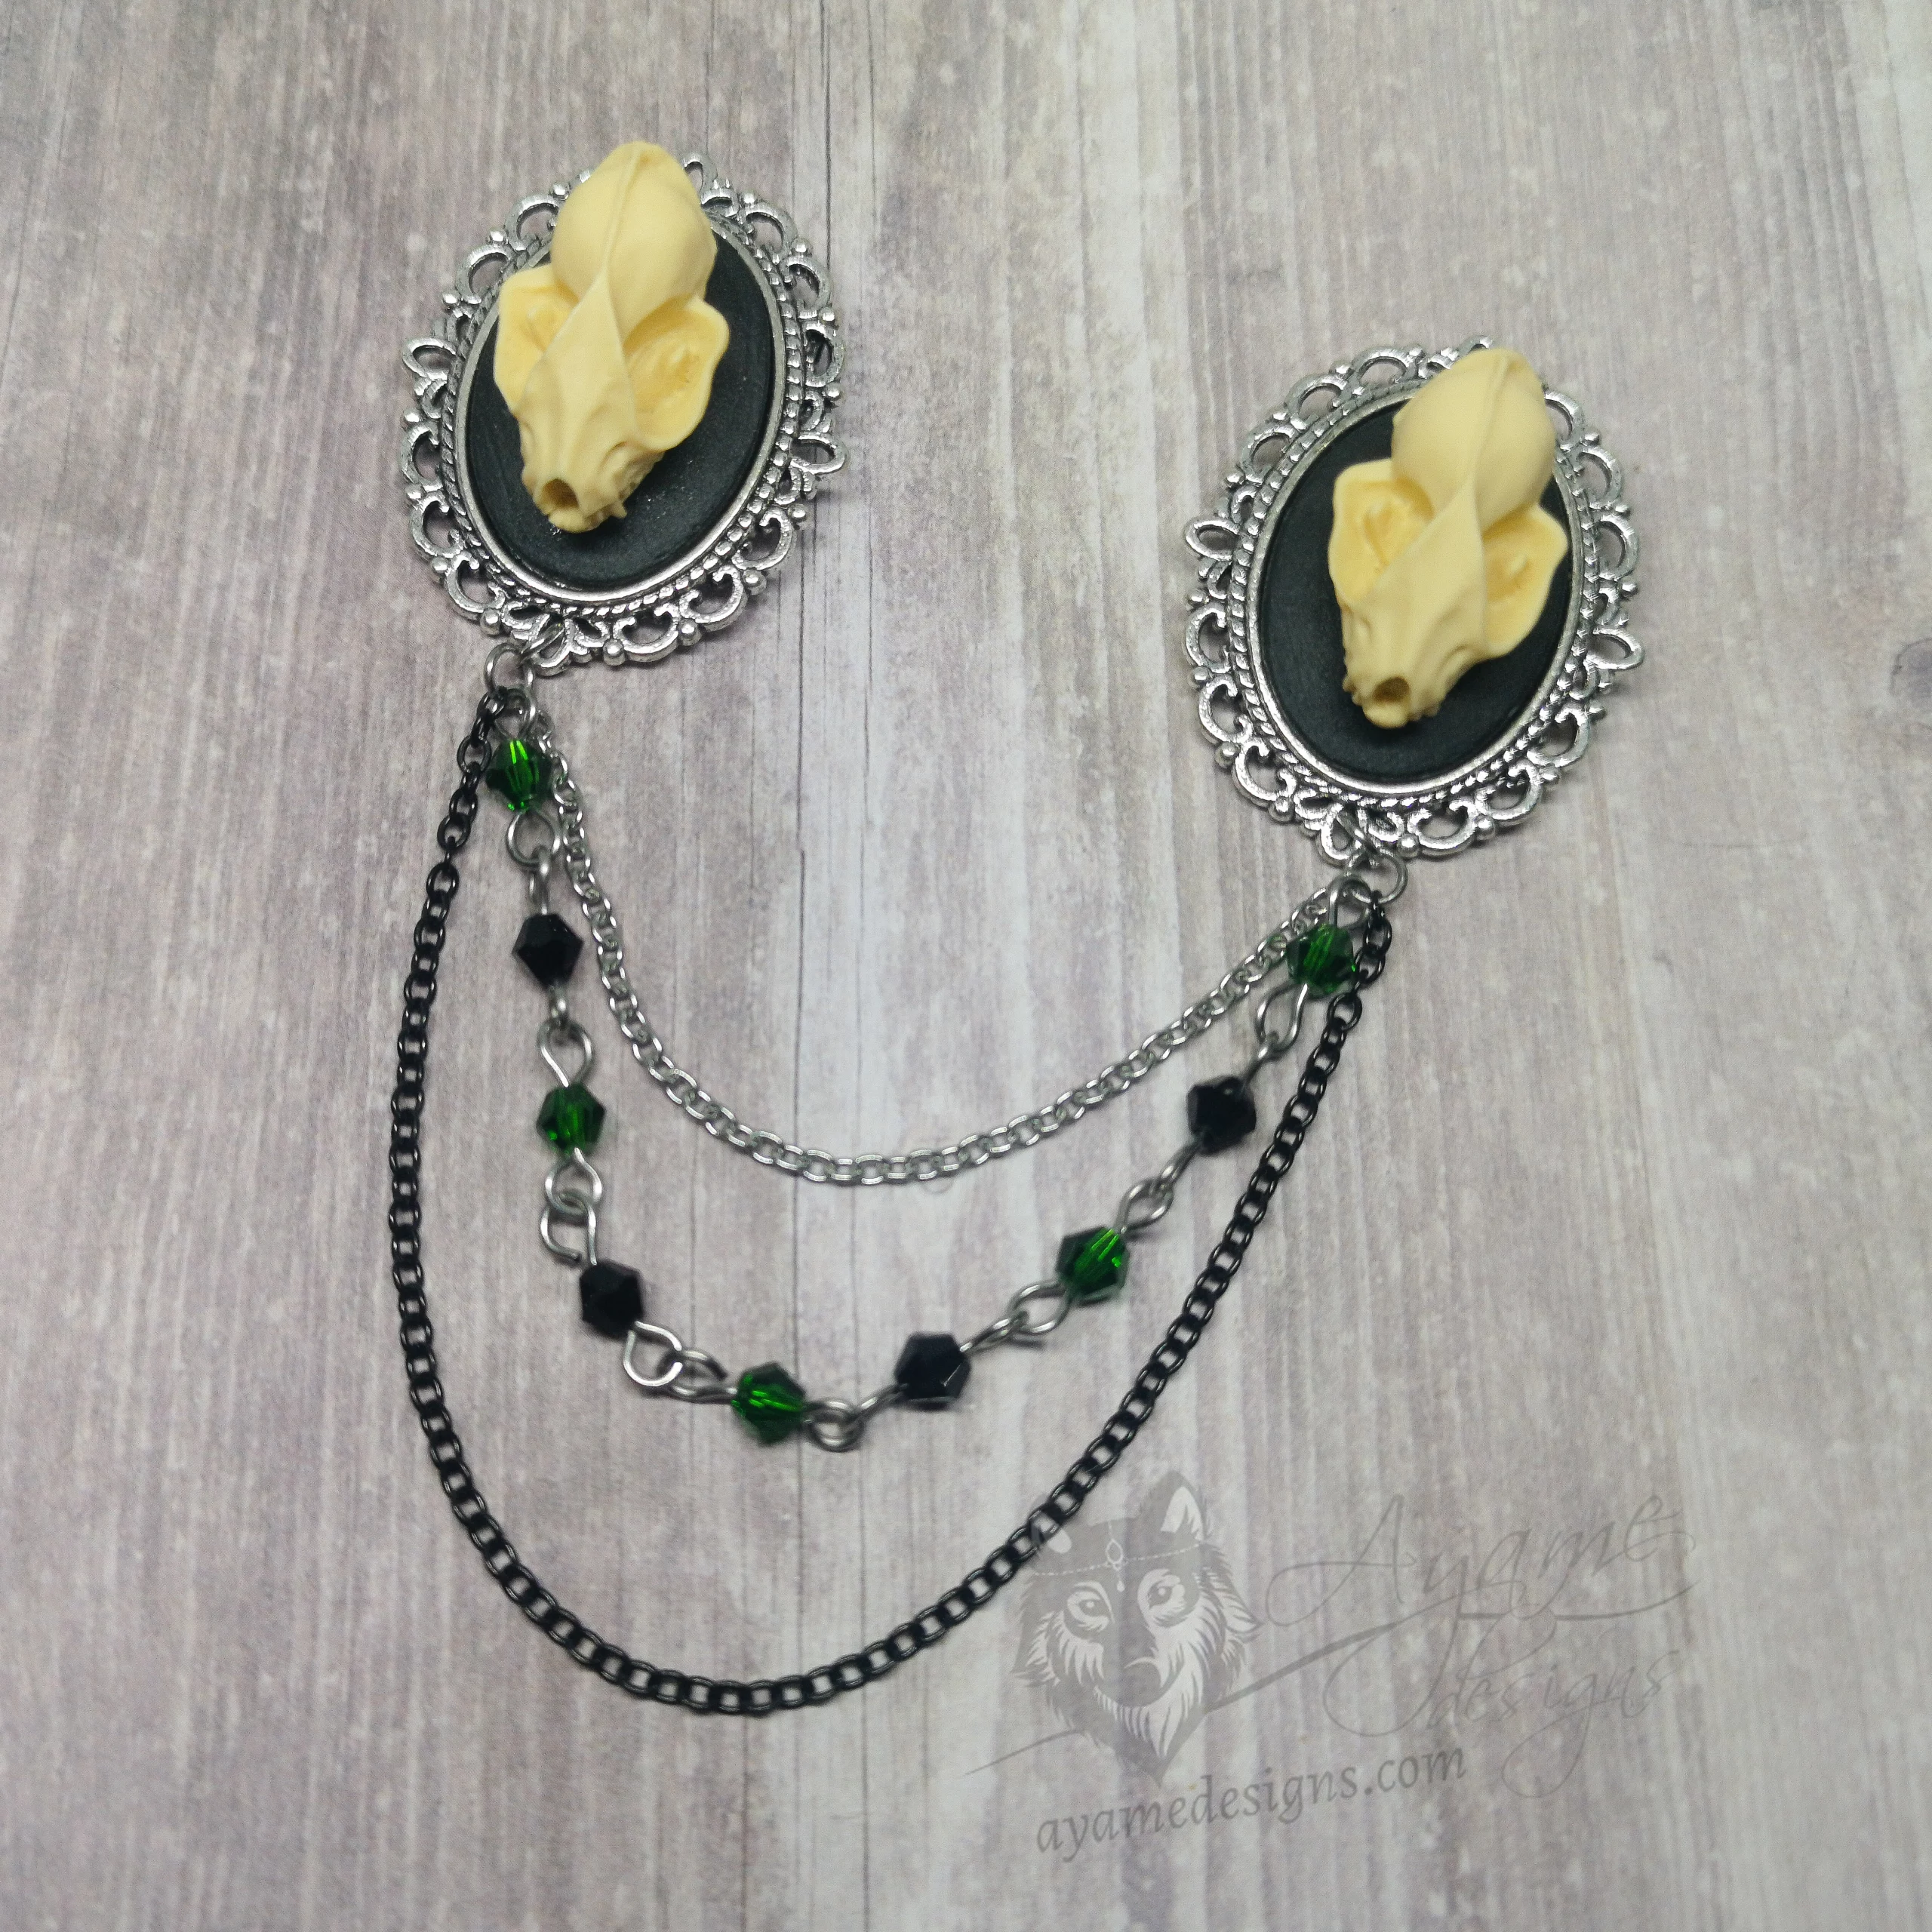 Collar pins with resin bat skulls in filigree frames, and 2 strands of chains and 1 strand of green and black Austrian crystal beads